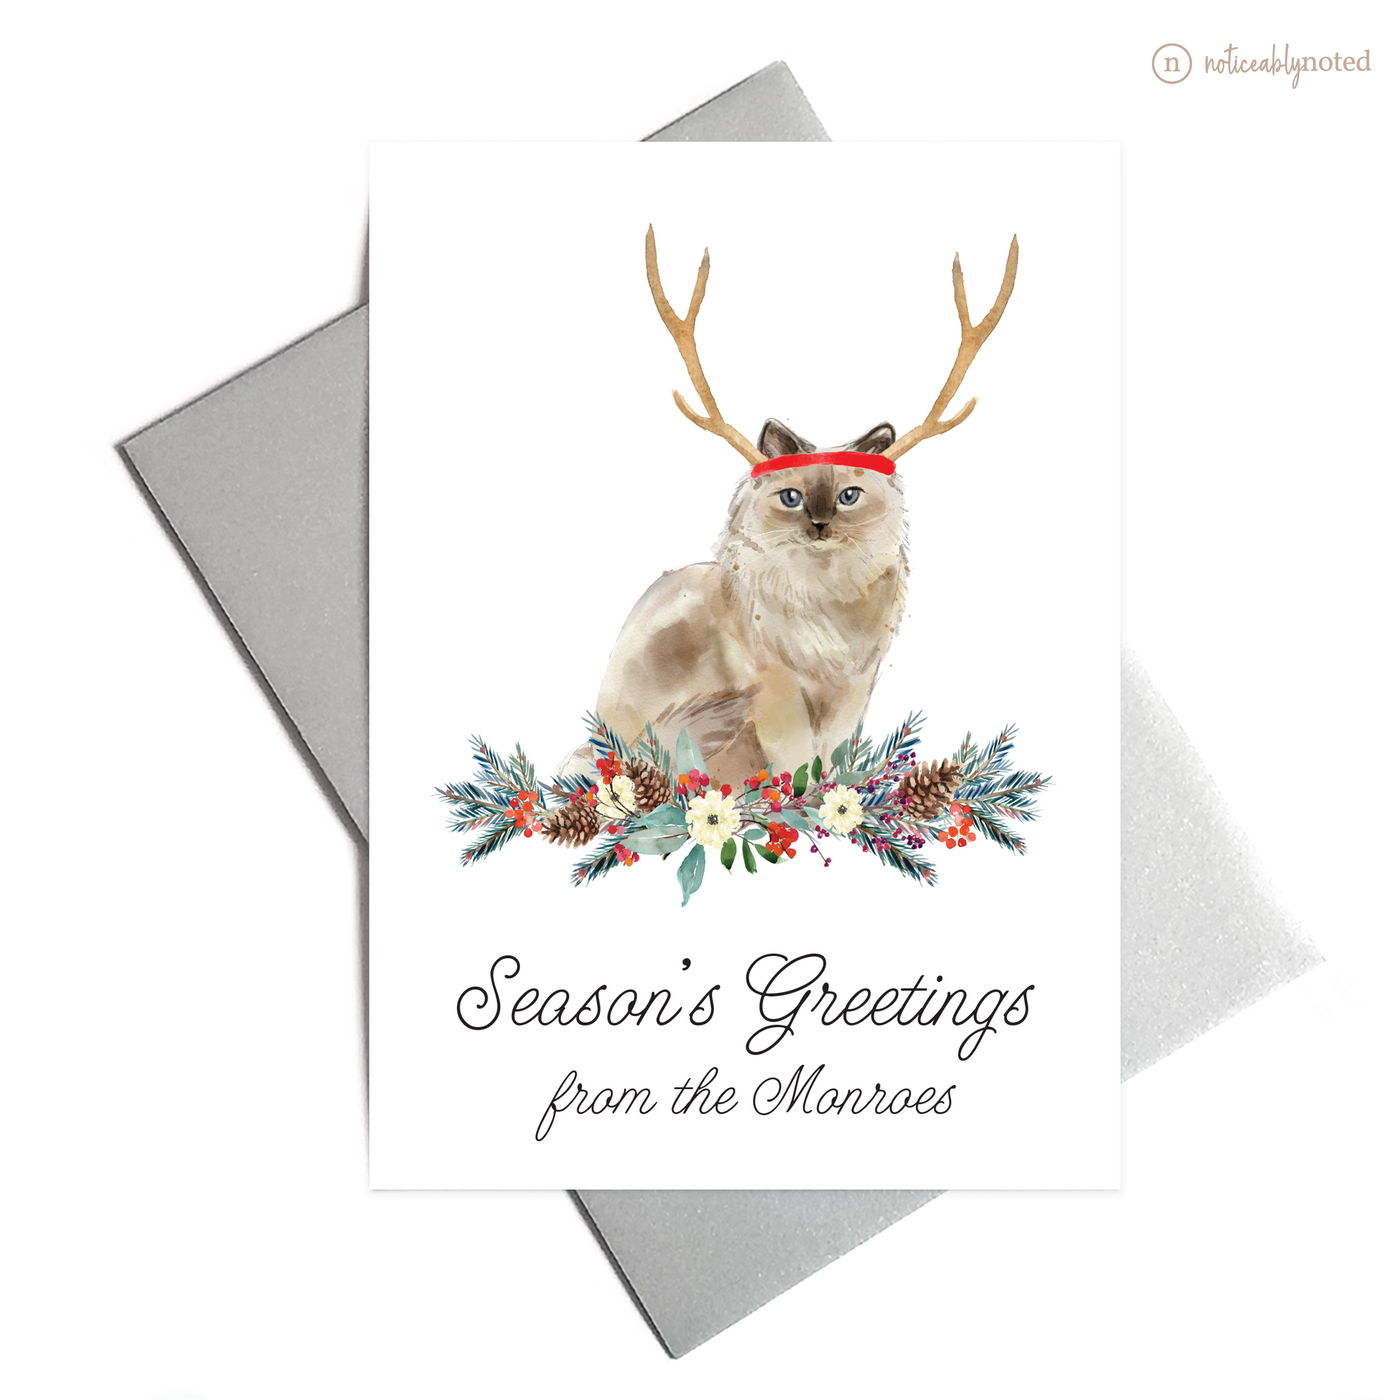 Ragdoll Christmas Cards | Noticeably Noted